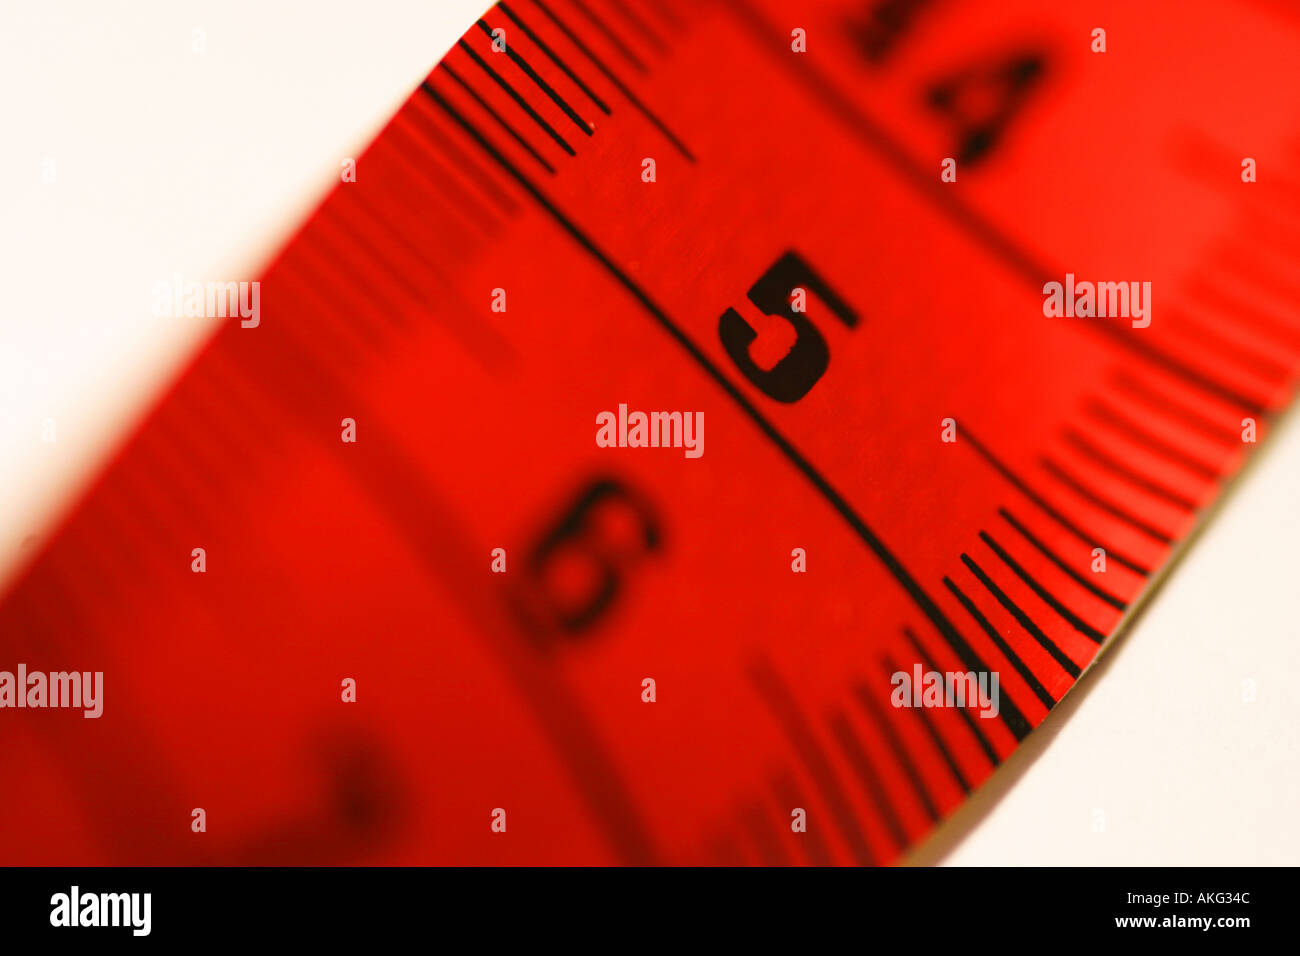 Tape measure close up red colour Stock Photo